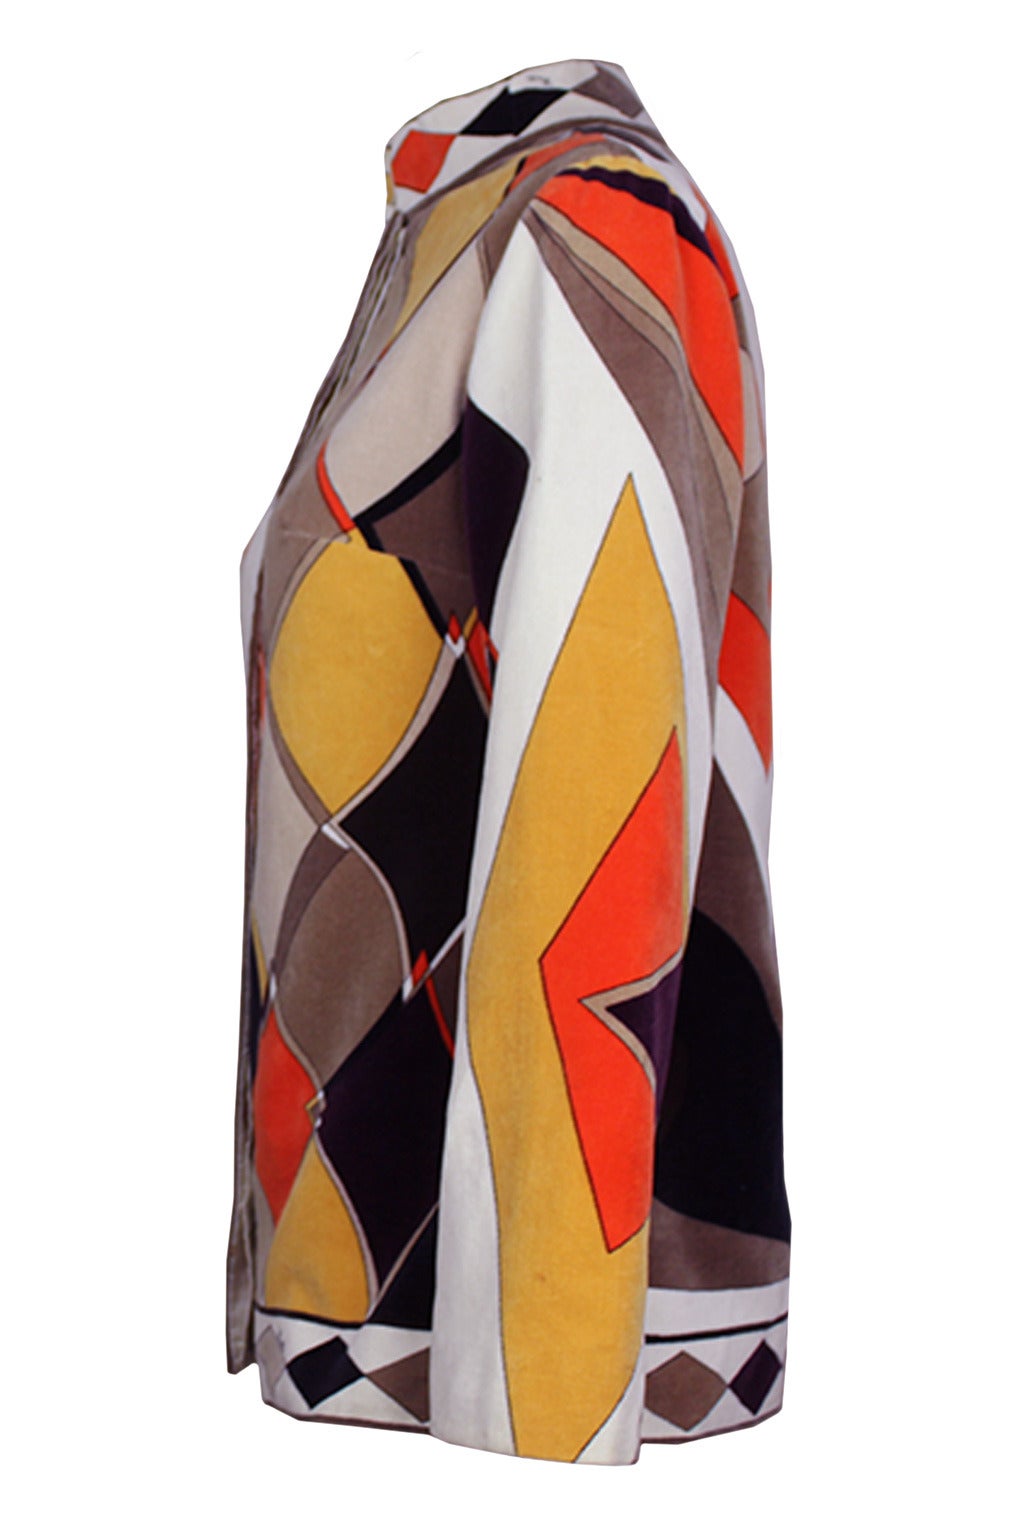 This vibrant Emilio Pucci cotton velvet jacket has an iconic late 1960's geometric design with the Pucci signature throughout. It has a Mandarin stand up collar and concealed fastenings. Clear buttons match to button holes on the inner lining of the